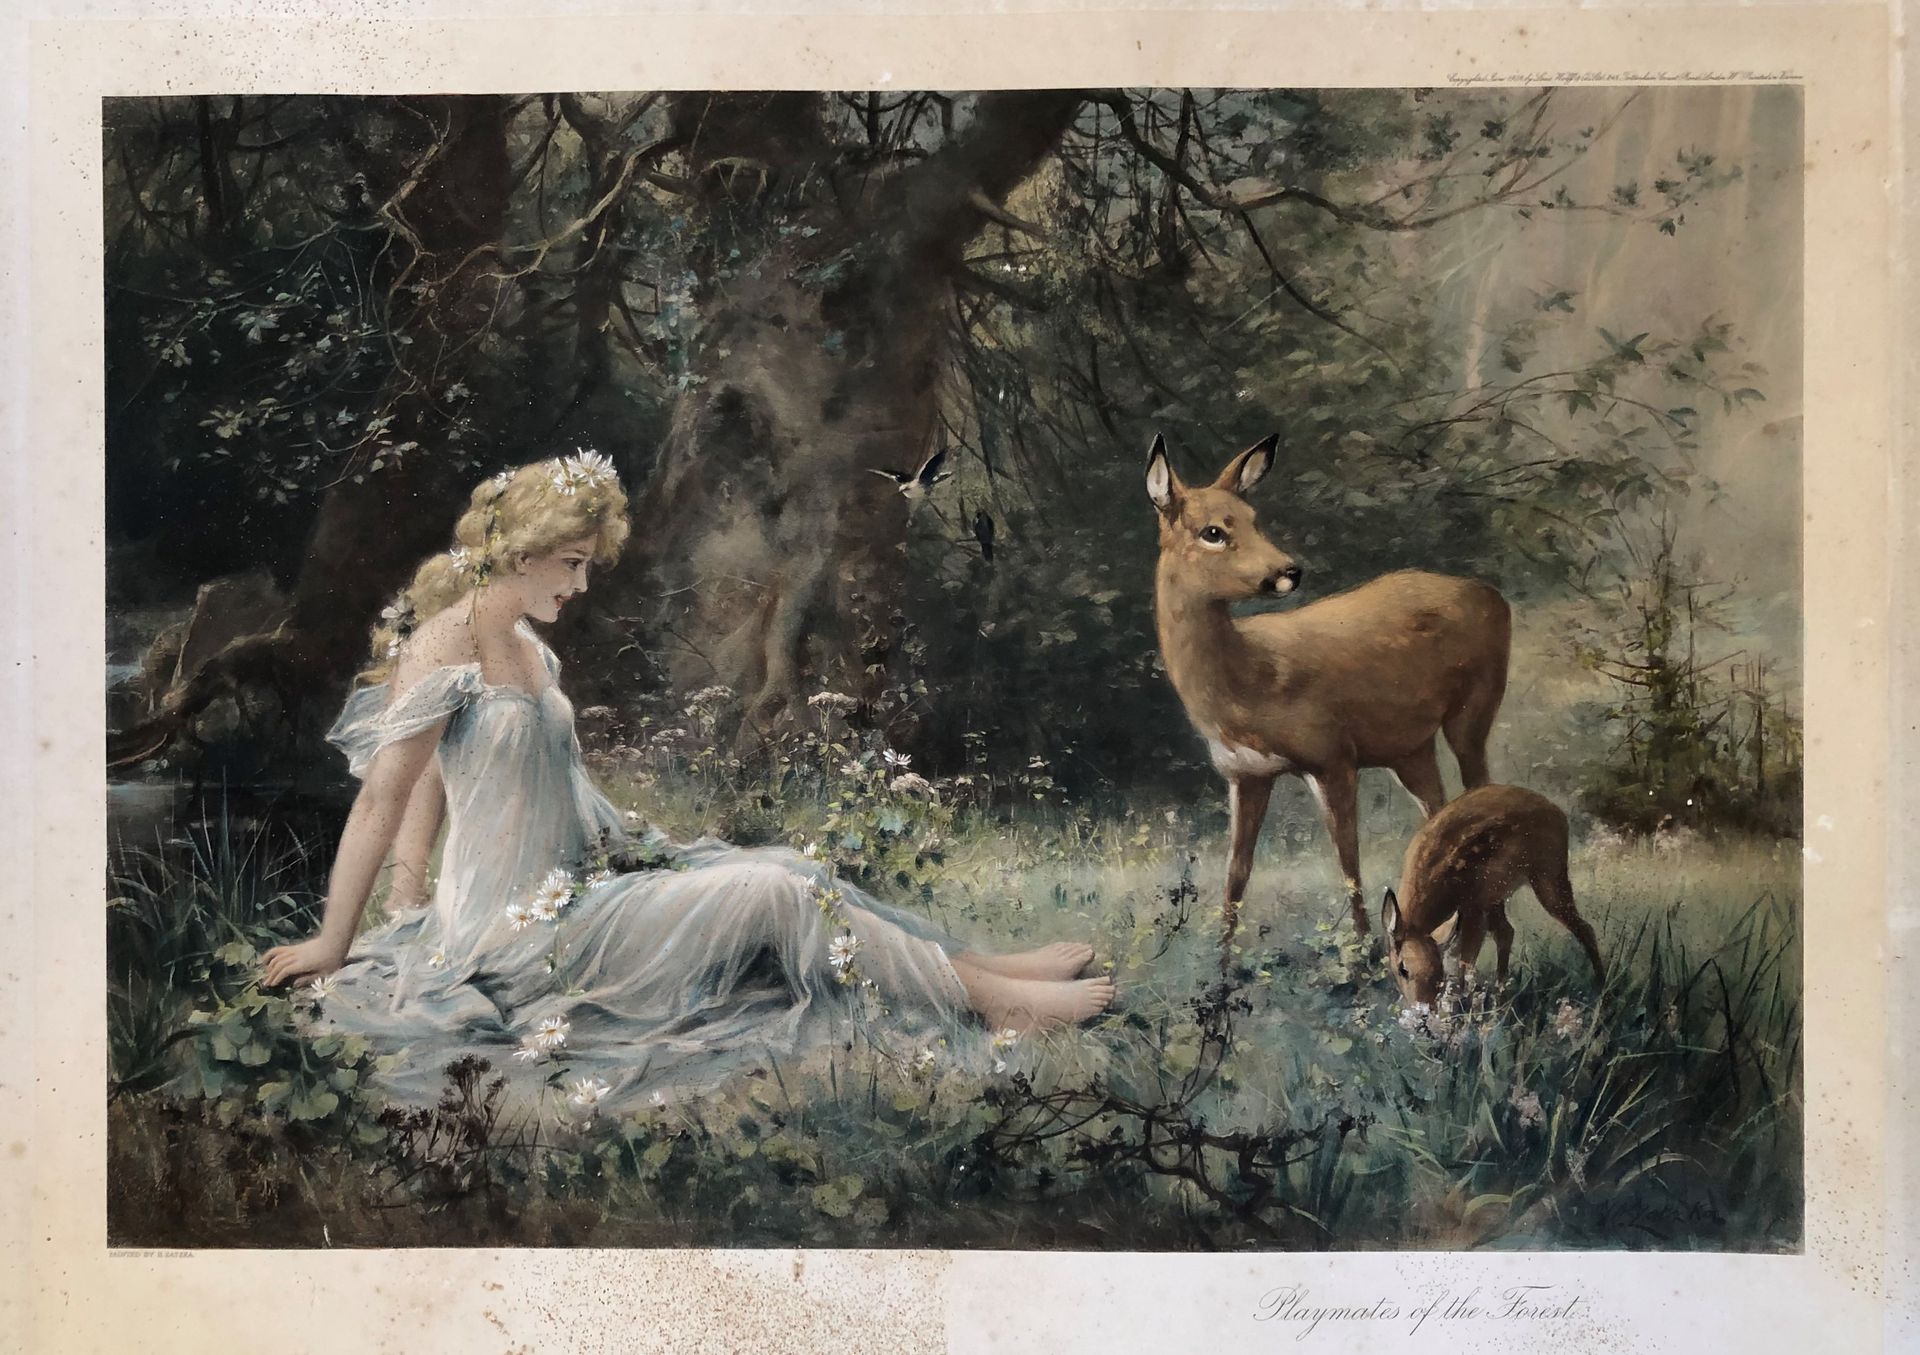 Null Hans ZATZKA (1859-1945)

"Playmates of the forest".

Lithograph in colours,&hellip;